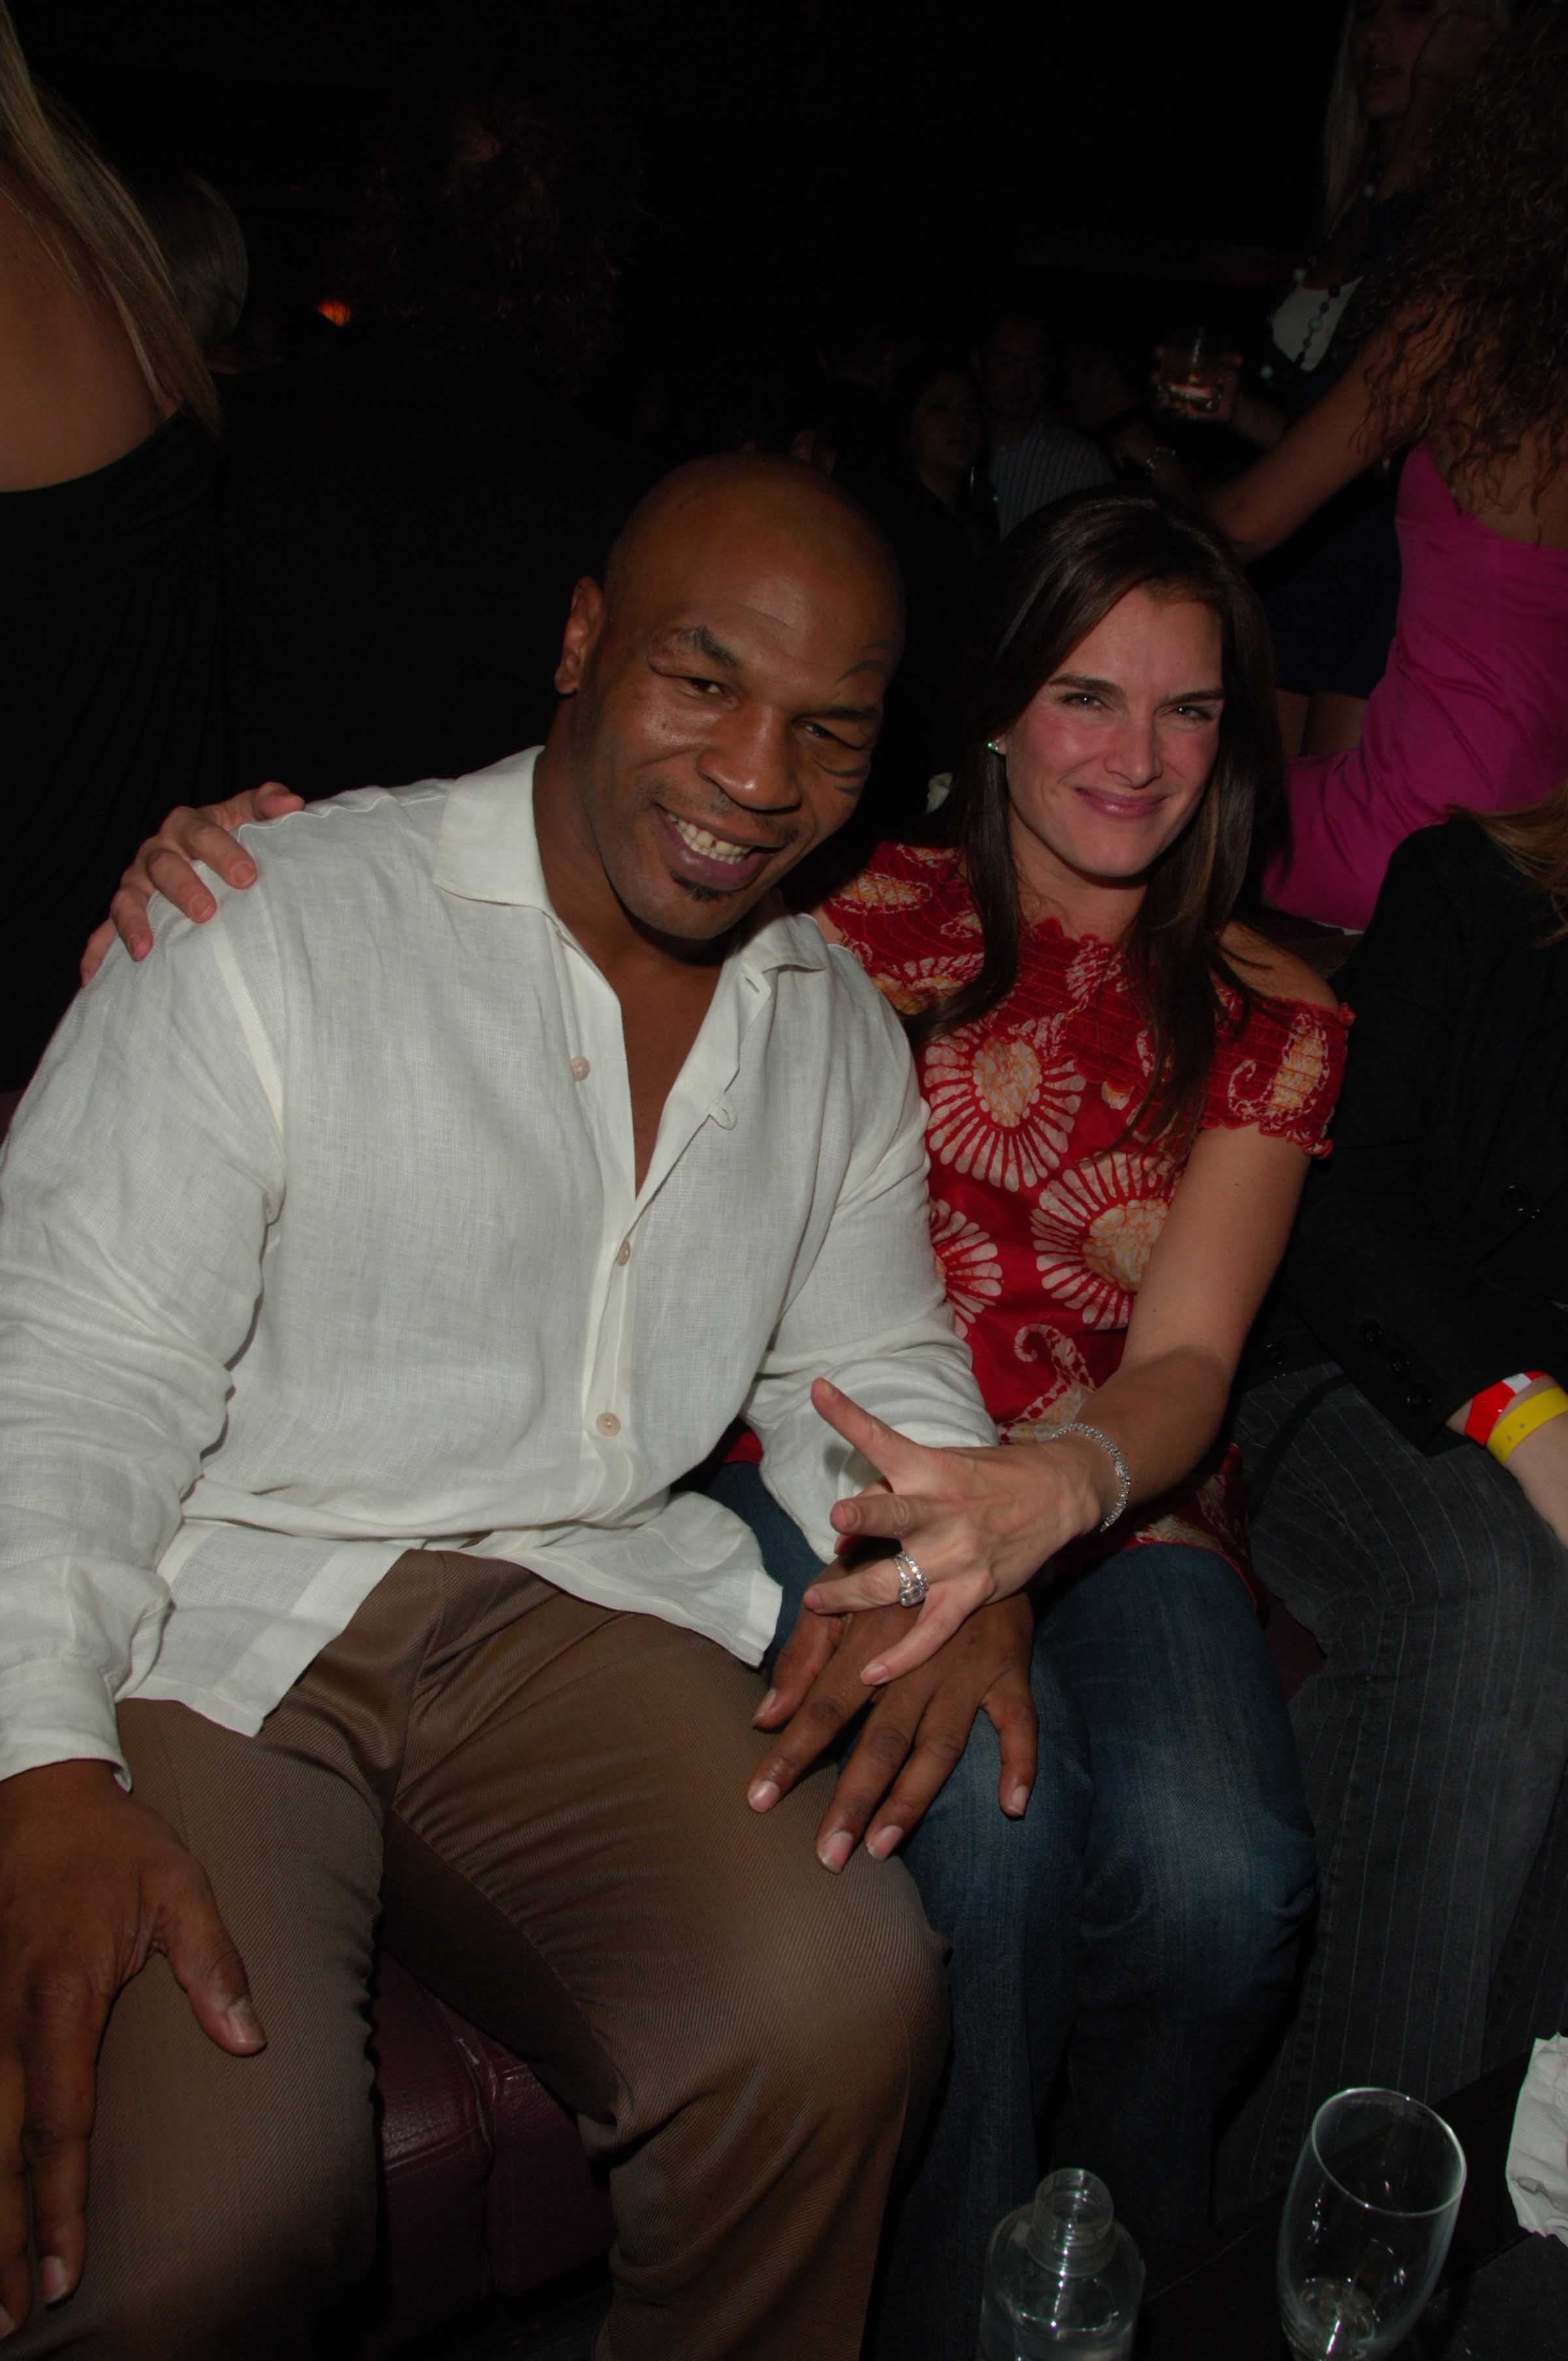 Brooke Shields sitting next to Mike Tyson with her arm around his shoulder at the TAO Las Vegas anniversary party in 2006